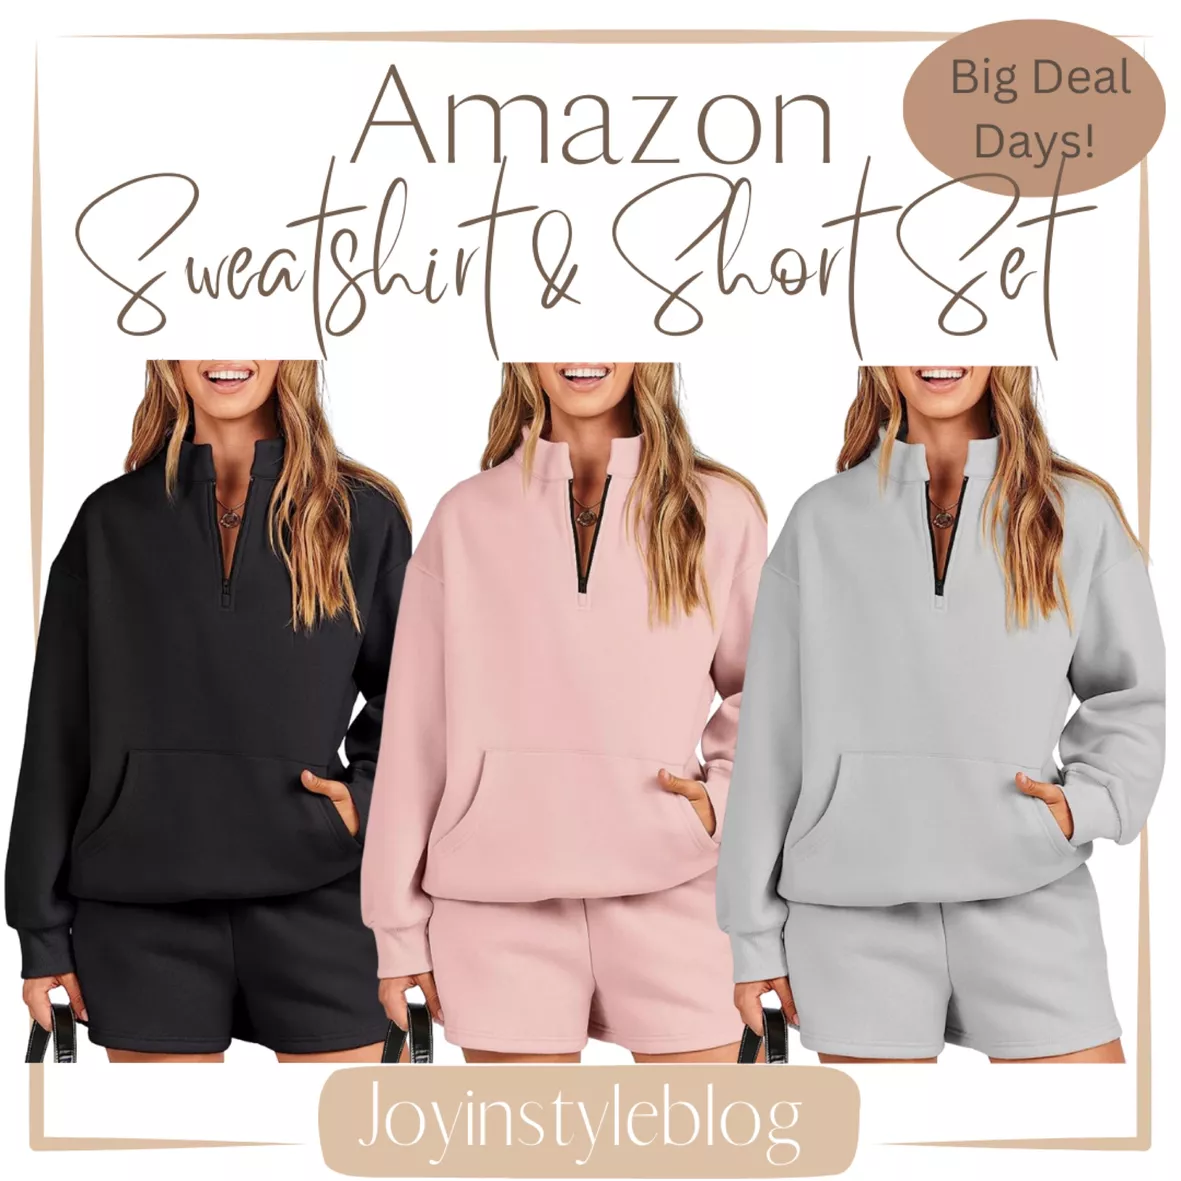  ANRABESS Womens 2 Piece Outfits Oversized Sweatsuit